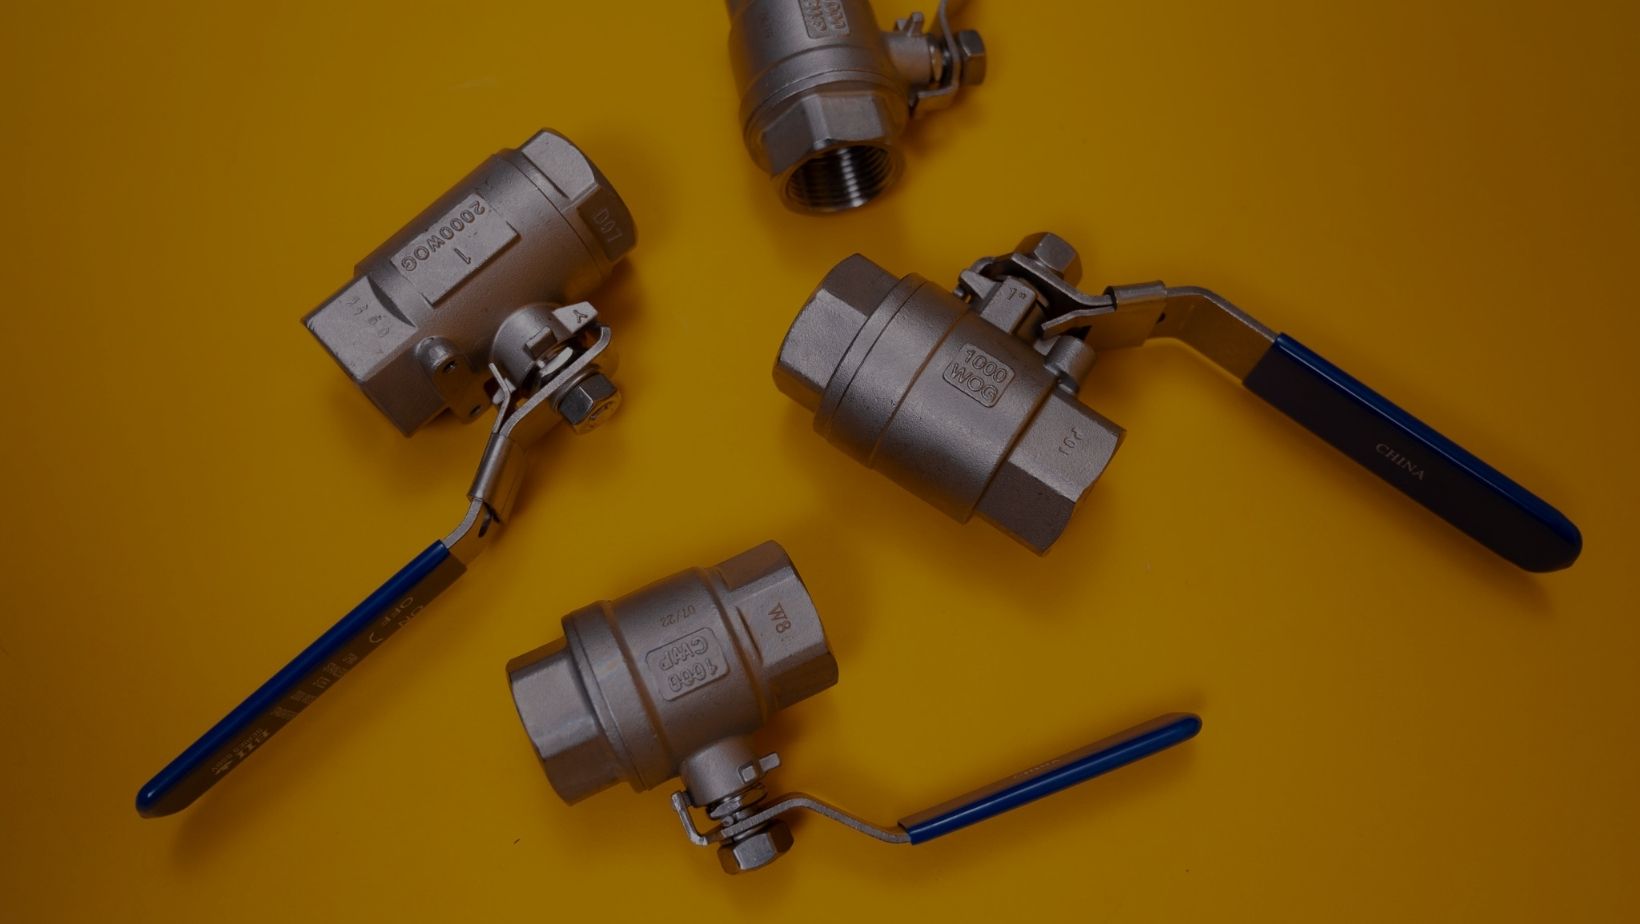 [Video] What the Heck is a Ball Valve?